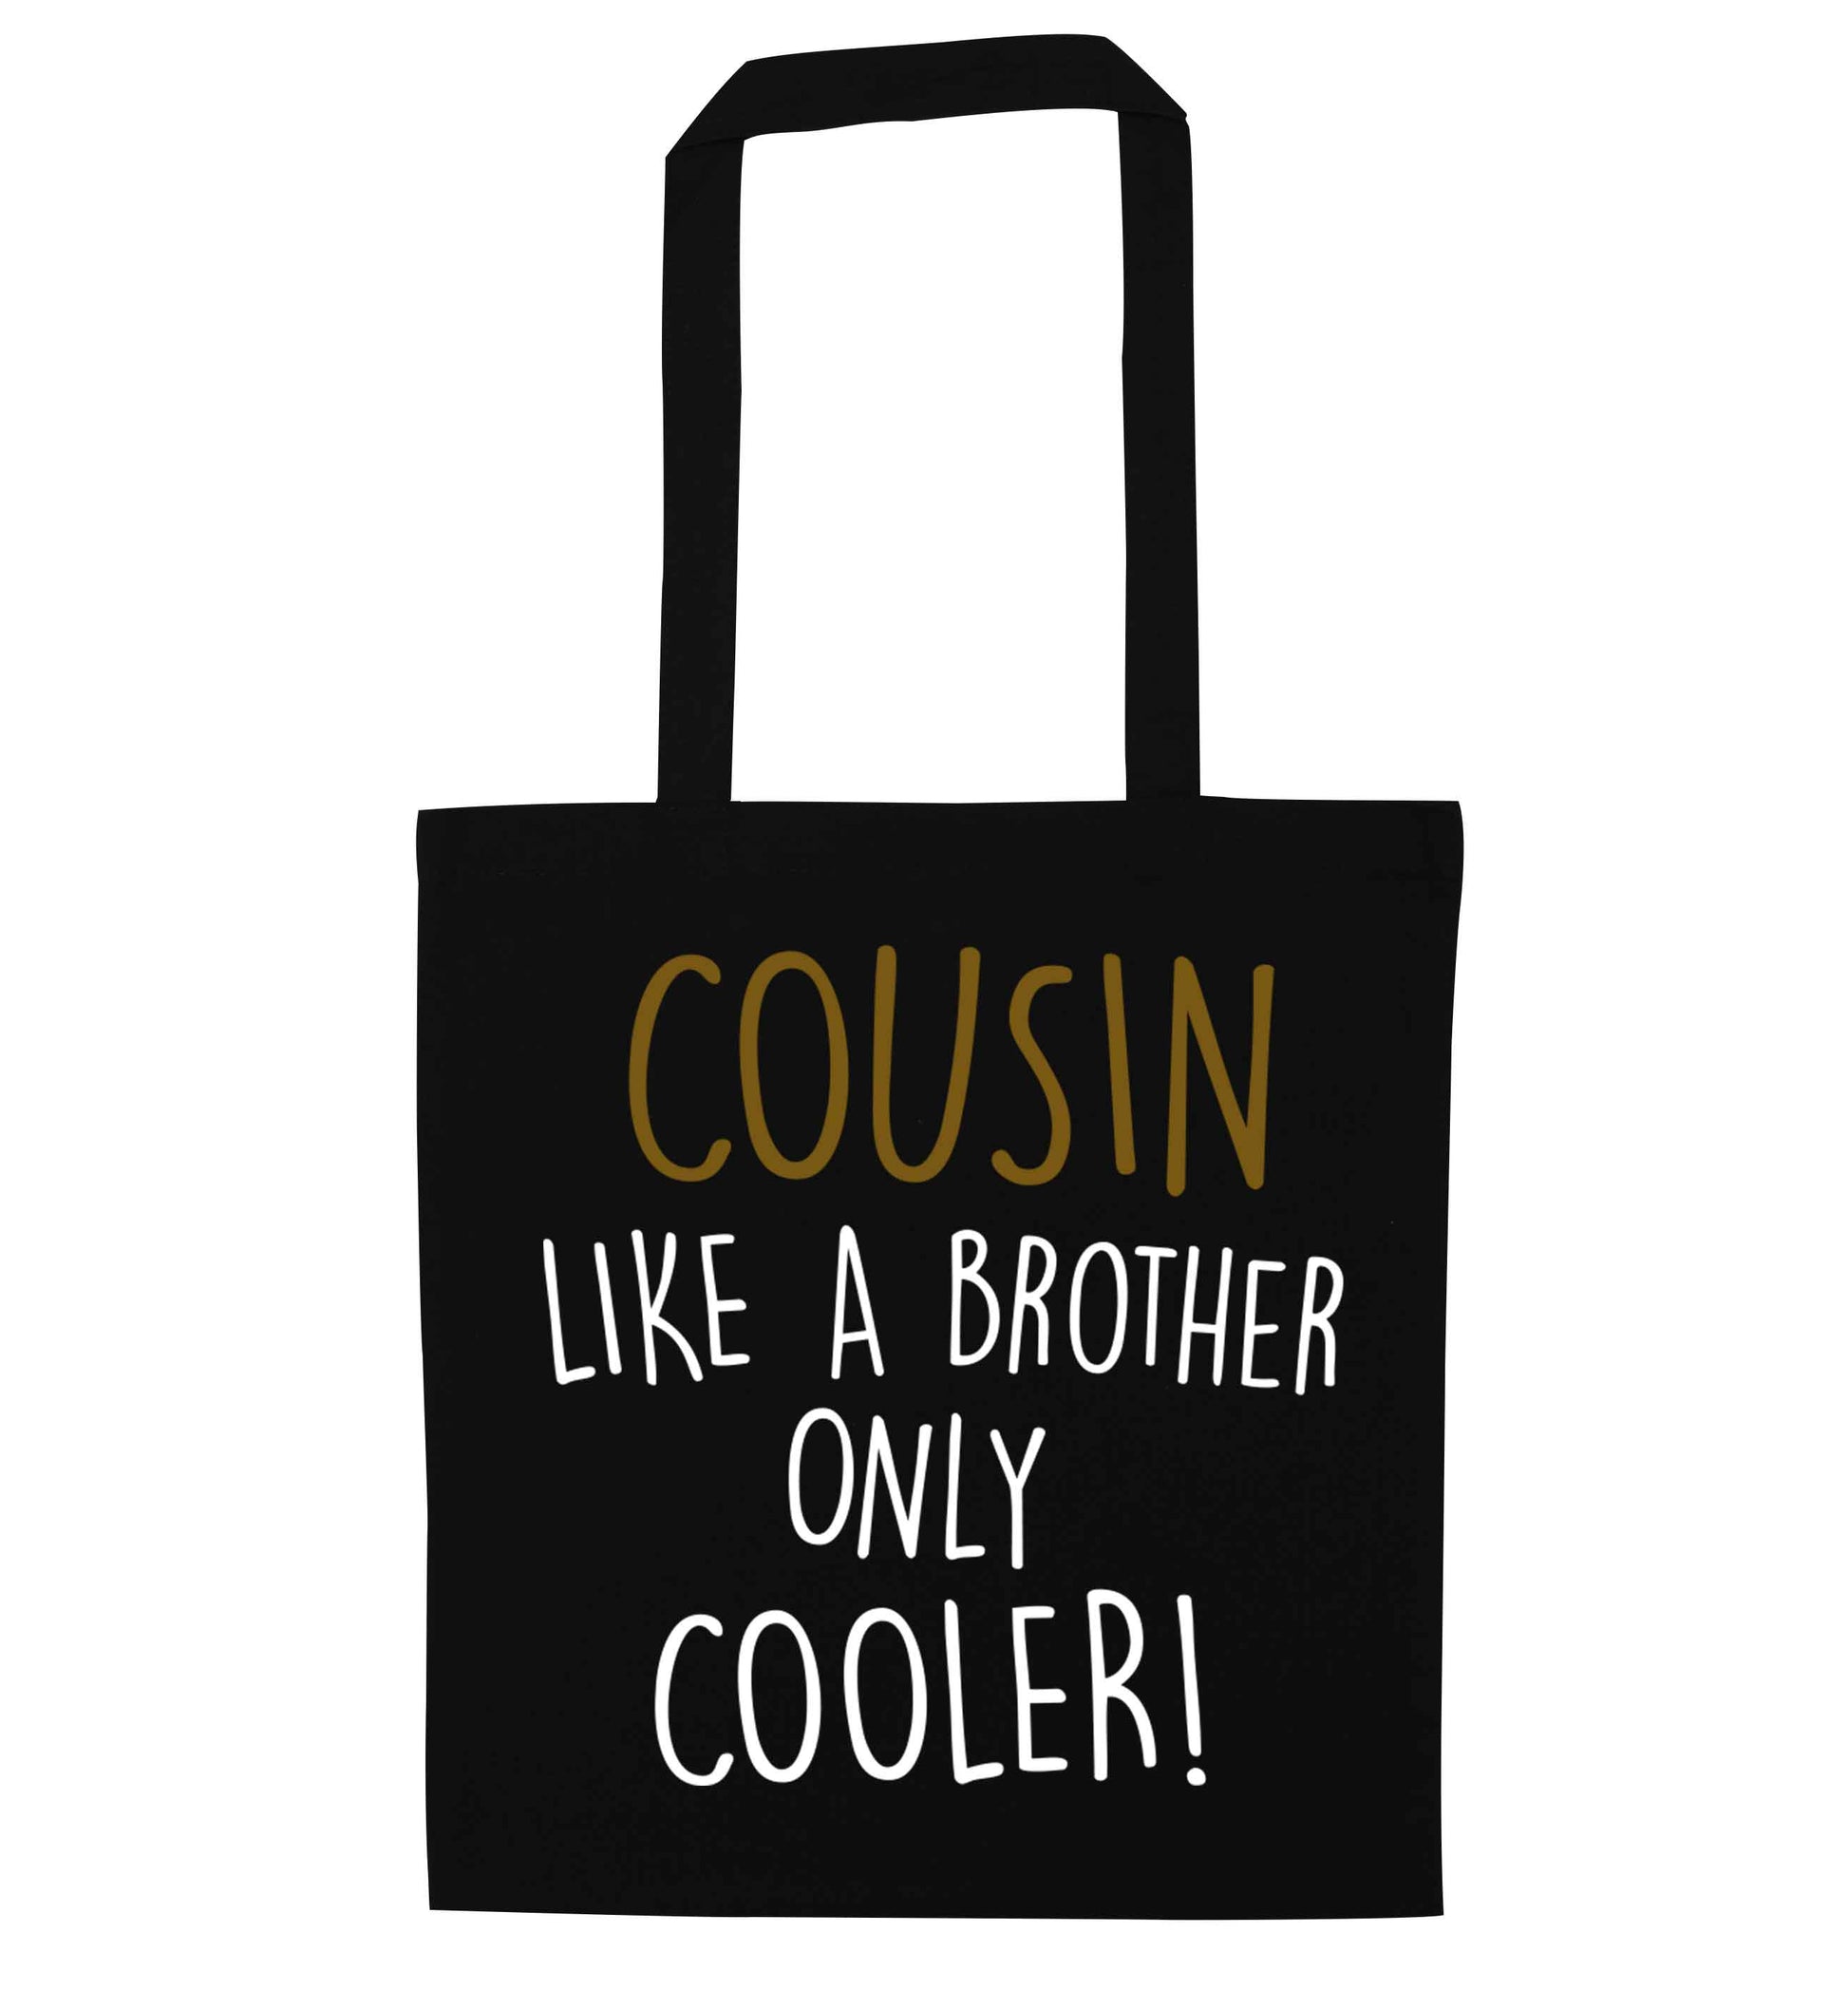 Cousin like a brother only cooler black tote bag